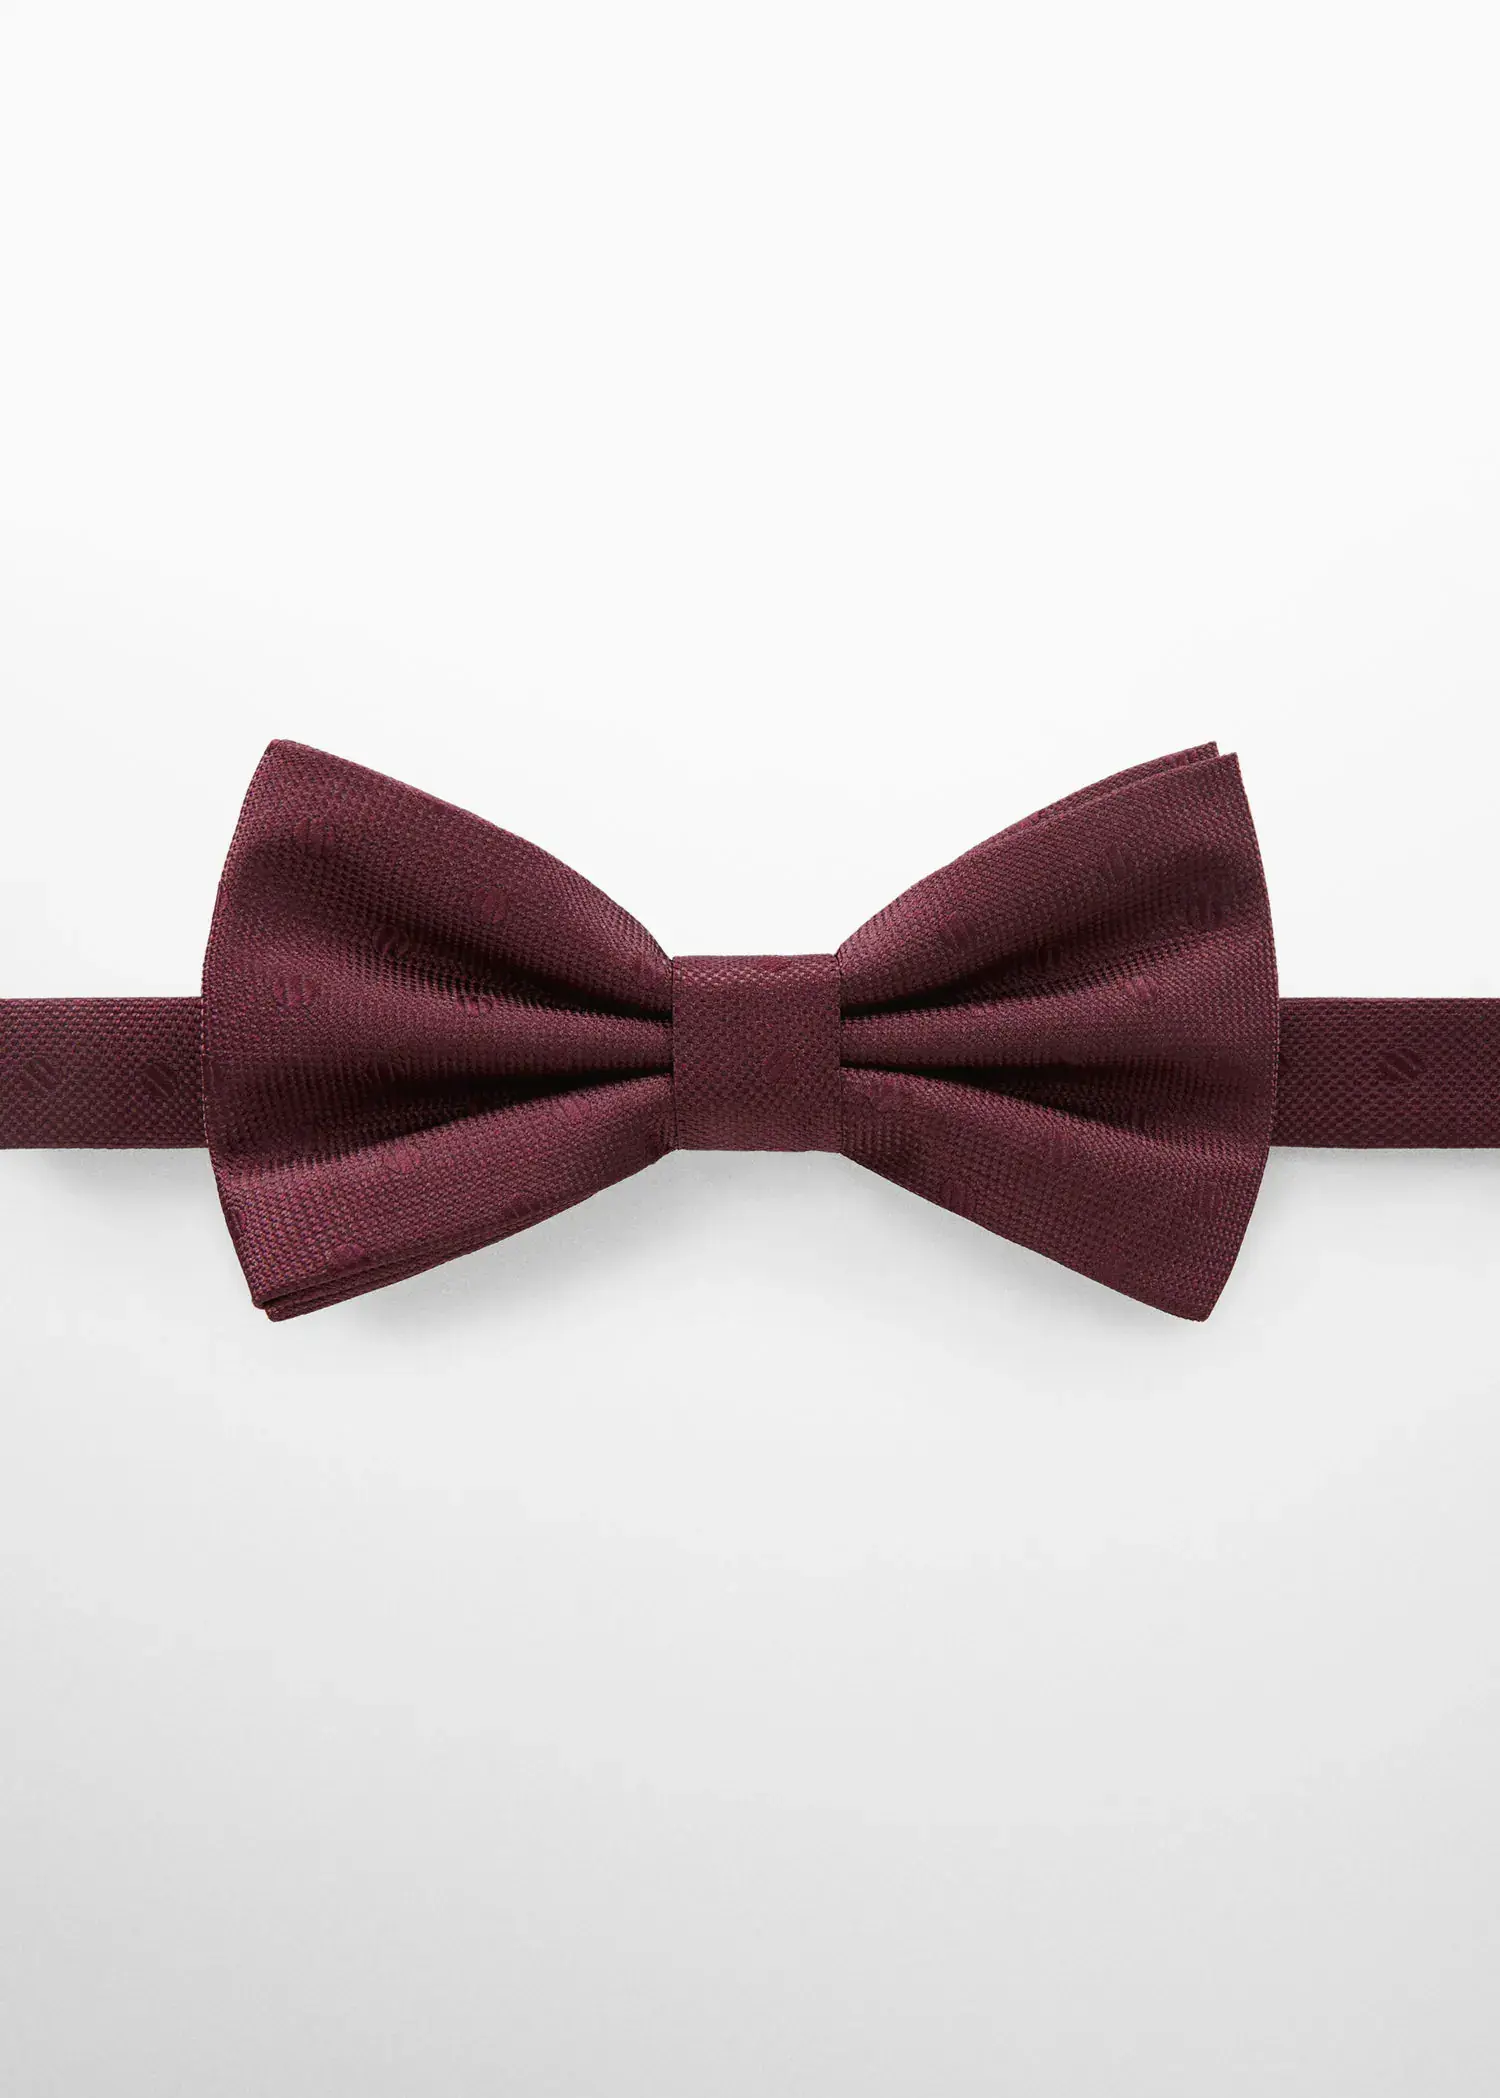 Mango Bow tie with polka-dot structure. a maroon bow tie on a white background. 